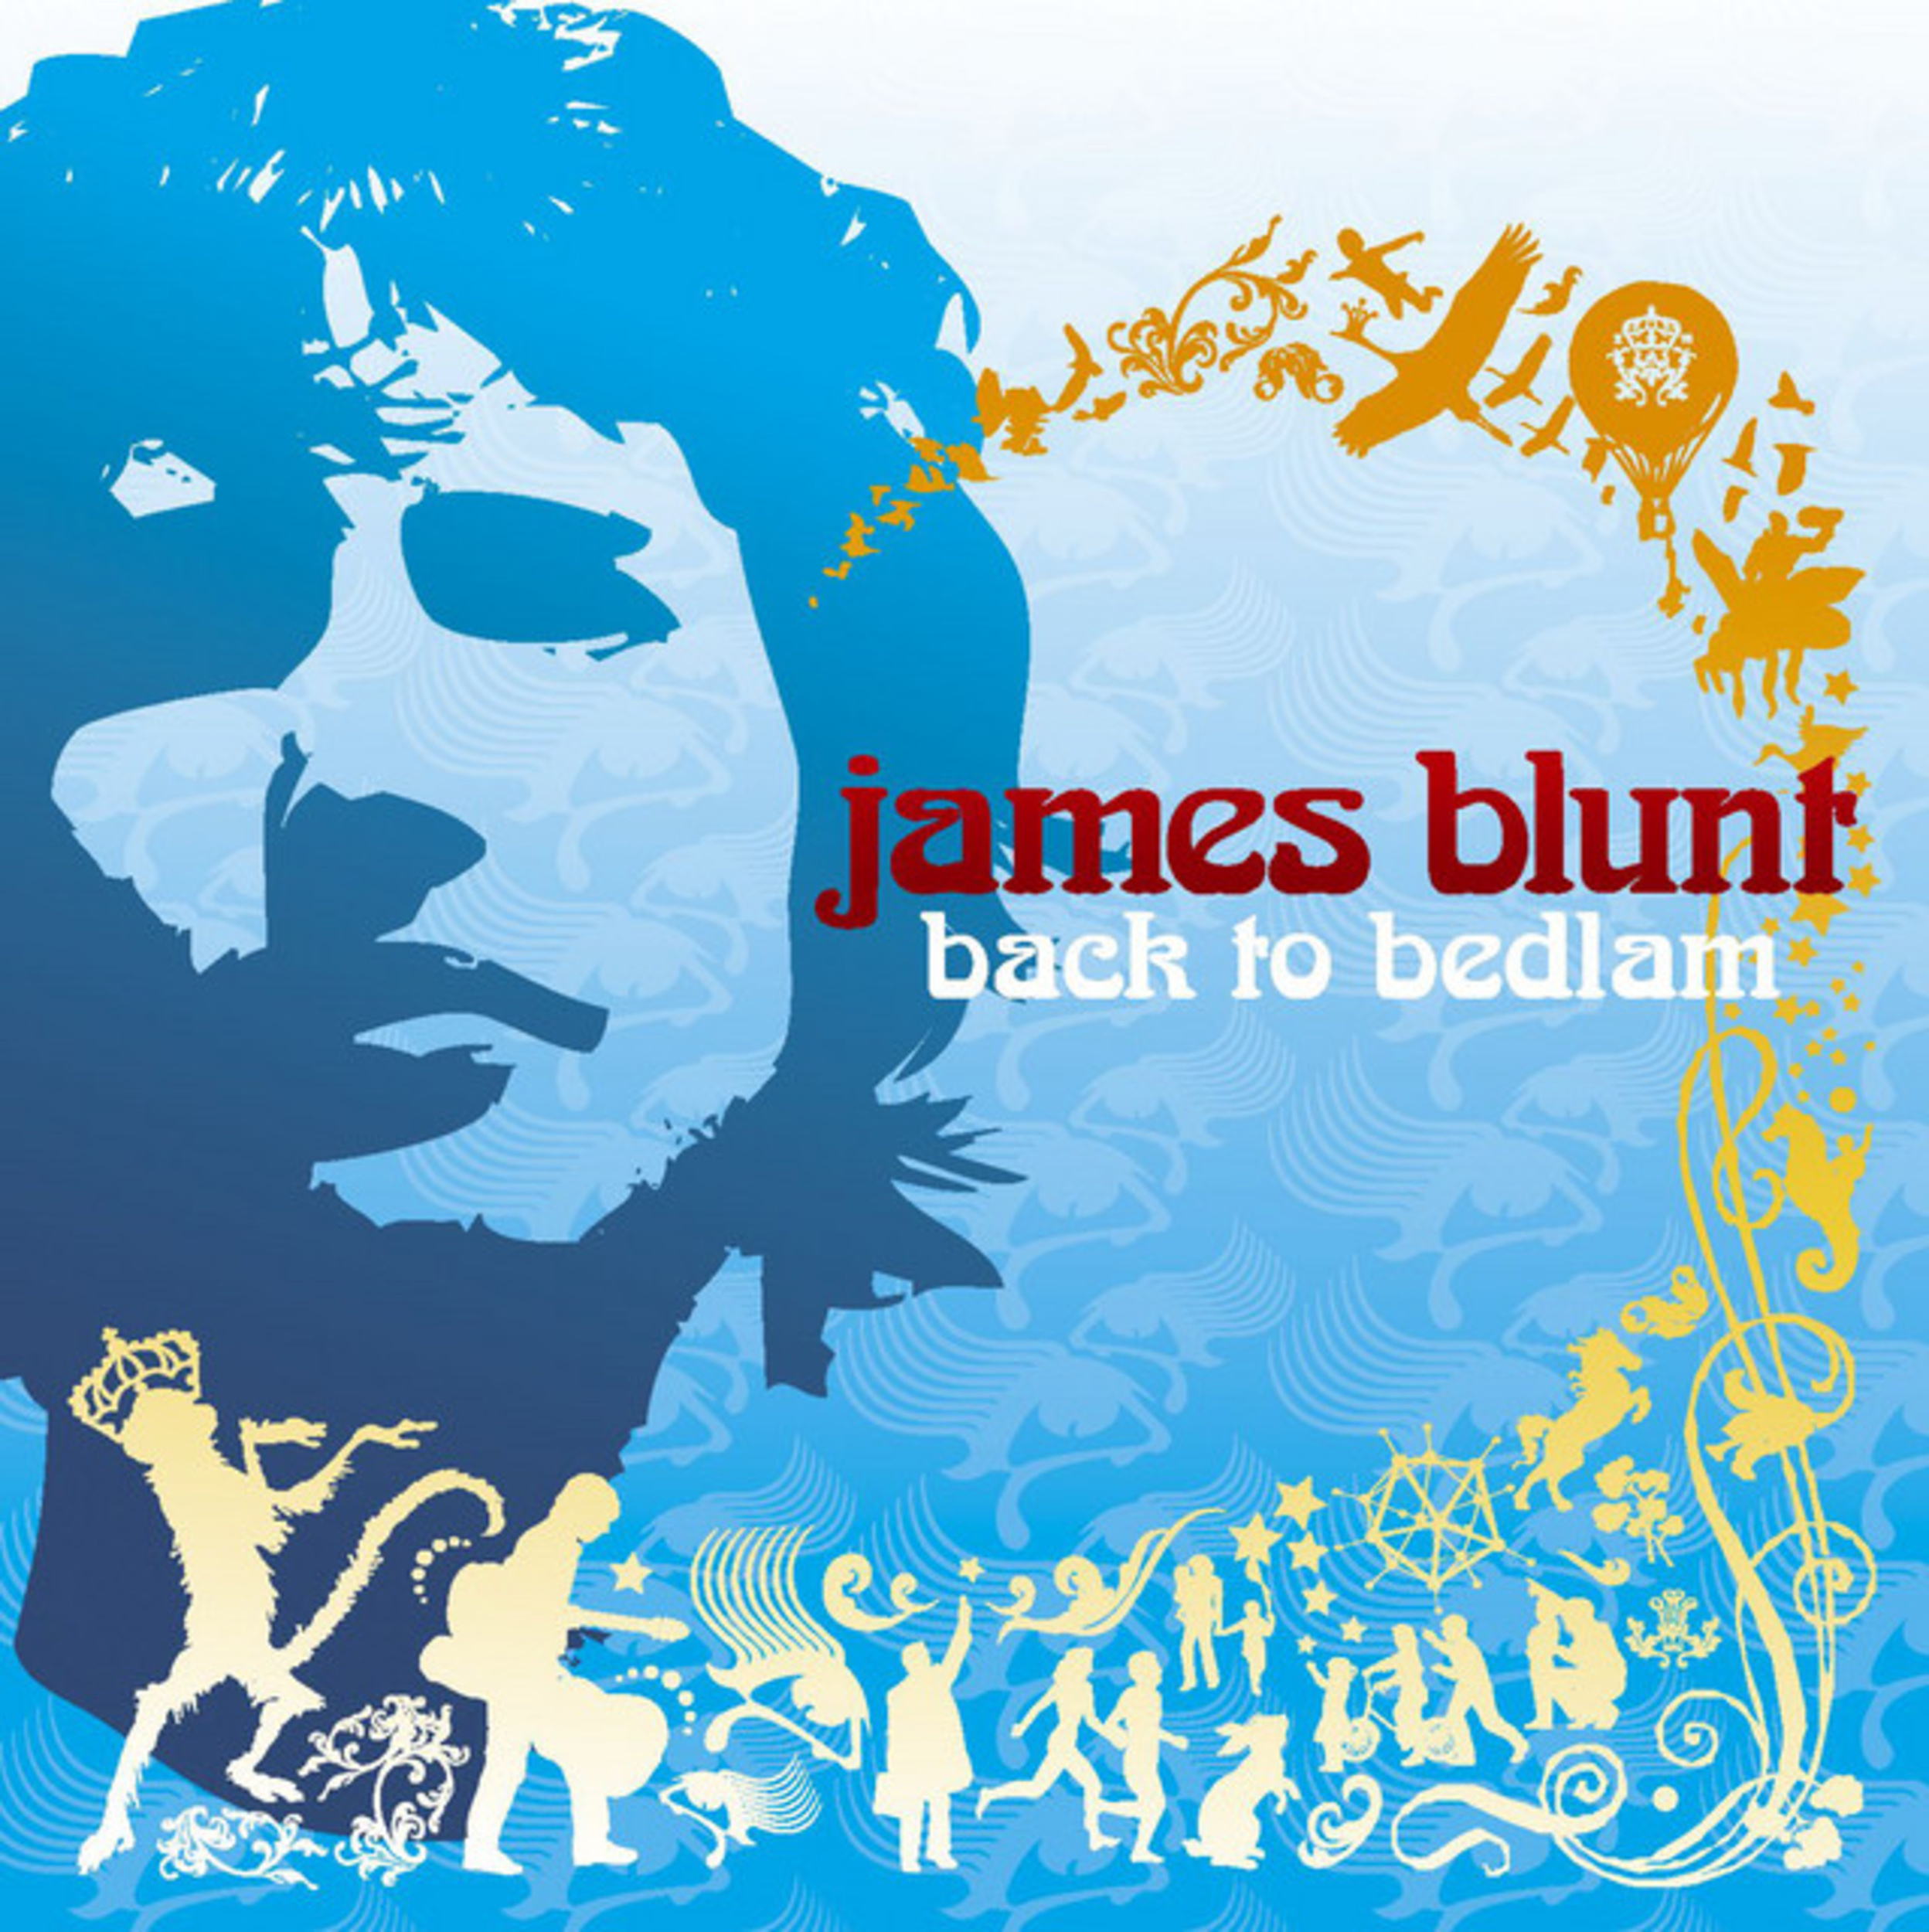 <p>Although James Blunt released his debut album, <em>Back to Bedlam</em>, in the fall of 2004, his third single, "You're Beautiful,<a href="https://www.youtube.com/watch?v=oofSnsGkops">" </a>helped push him into mainstream status. The song helped the album peak at No. 2 on the <em>Billboard</em> 200. </p><p><a href='https://www.msn.com/en-us/community/channel/vid-cj9pqbr0vn9in2b6ddcd8sfgpfq6x6utp44fssrv6mc2gtybw0us'>Follow us on MSN to see more of our exclusive entertainment content.</a></p>